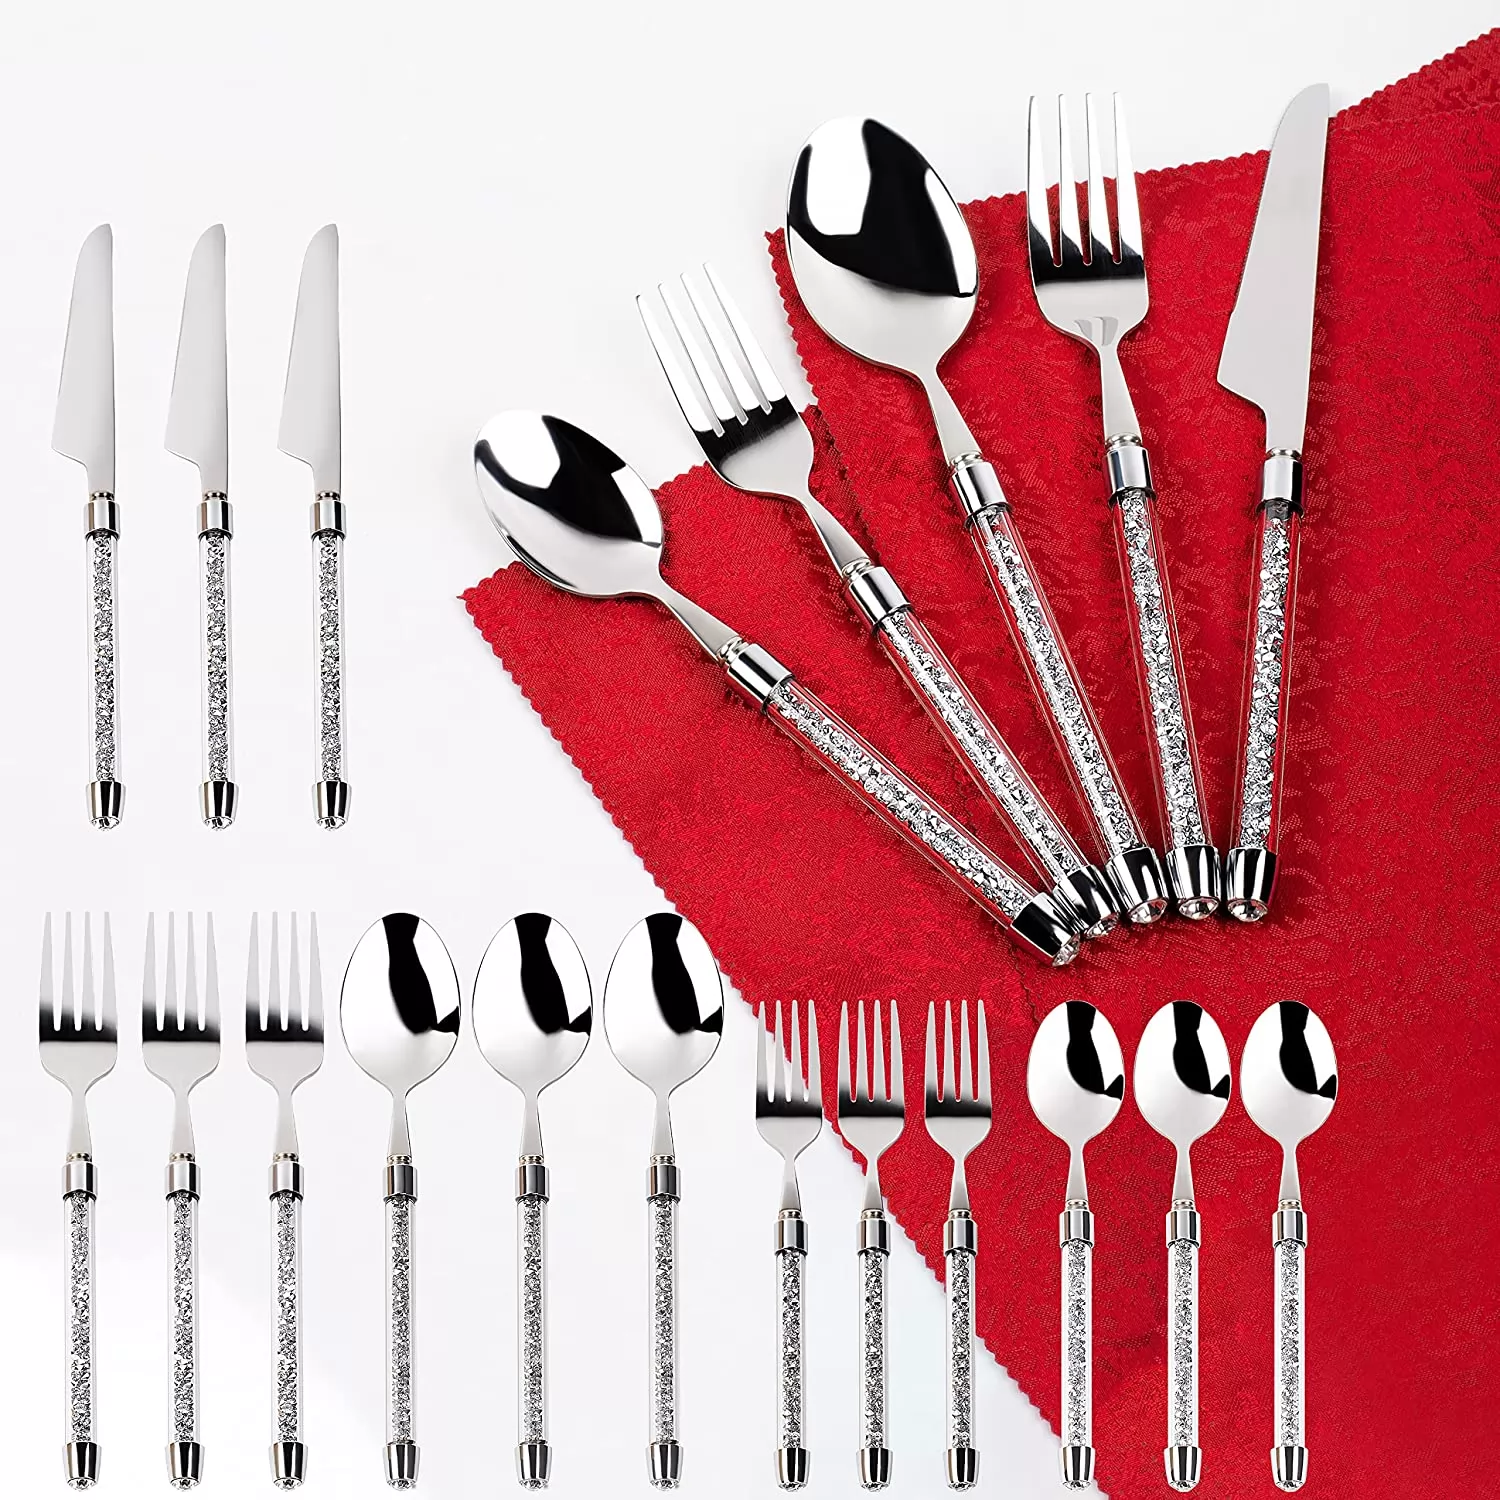 SHYFOY 20PCS Stainless Steel Silverware Set, Luxury Crushed Diamond Party Decor Flatware, Mirror Polished Cutlery Utensil Set, Durable Home Eating Kit